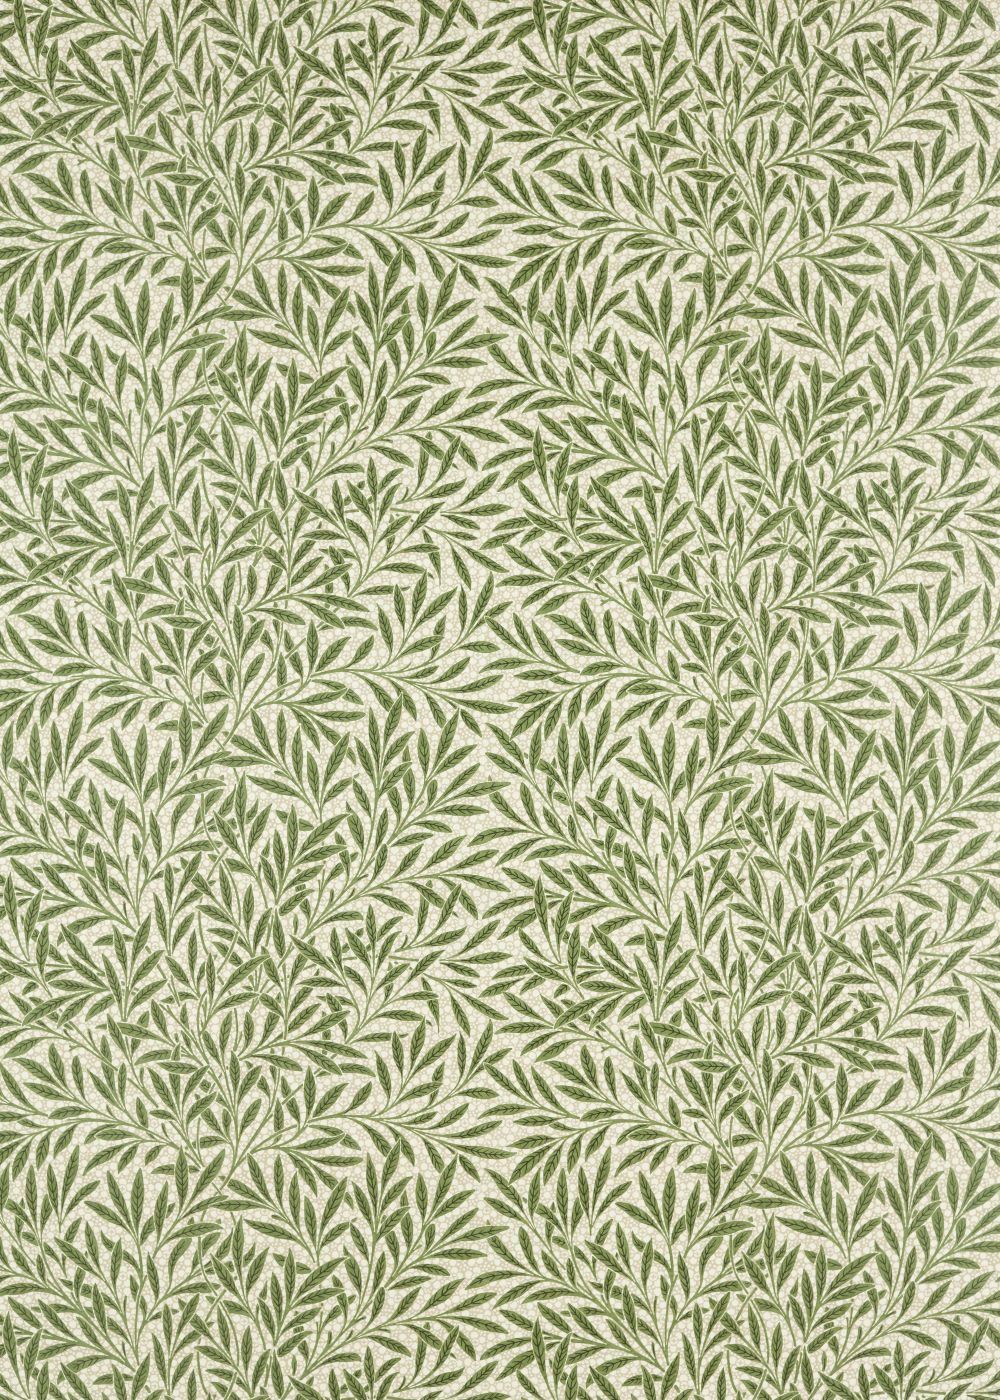 Emerys Willow Fabric - Leaf Green - by Morris